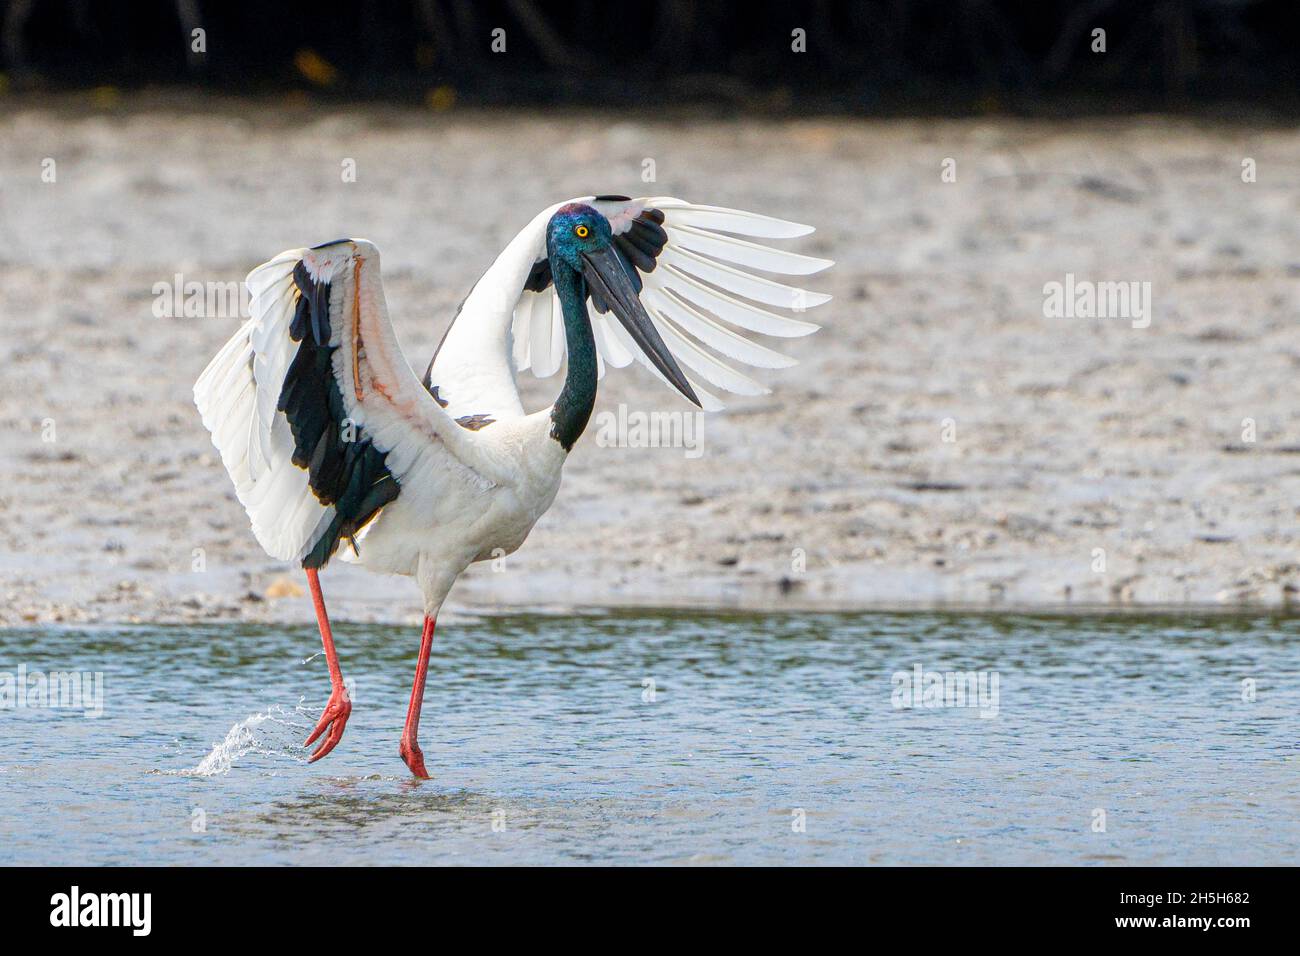 Black-necked stork (Ephippiorhynchus asiaticus) flapping wings to herd fish into shallow water.  North Queensland, Australia Stock Photo